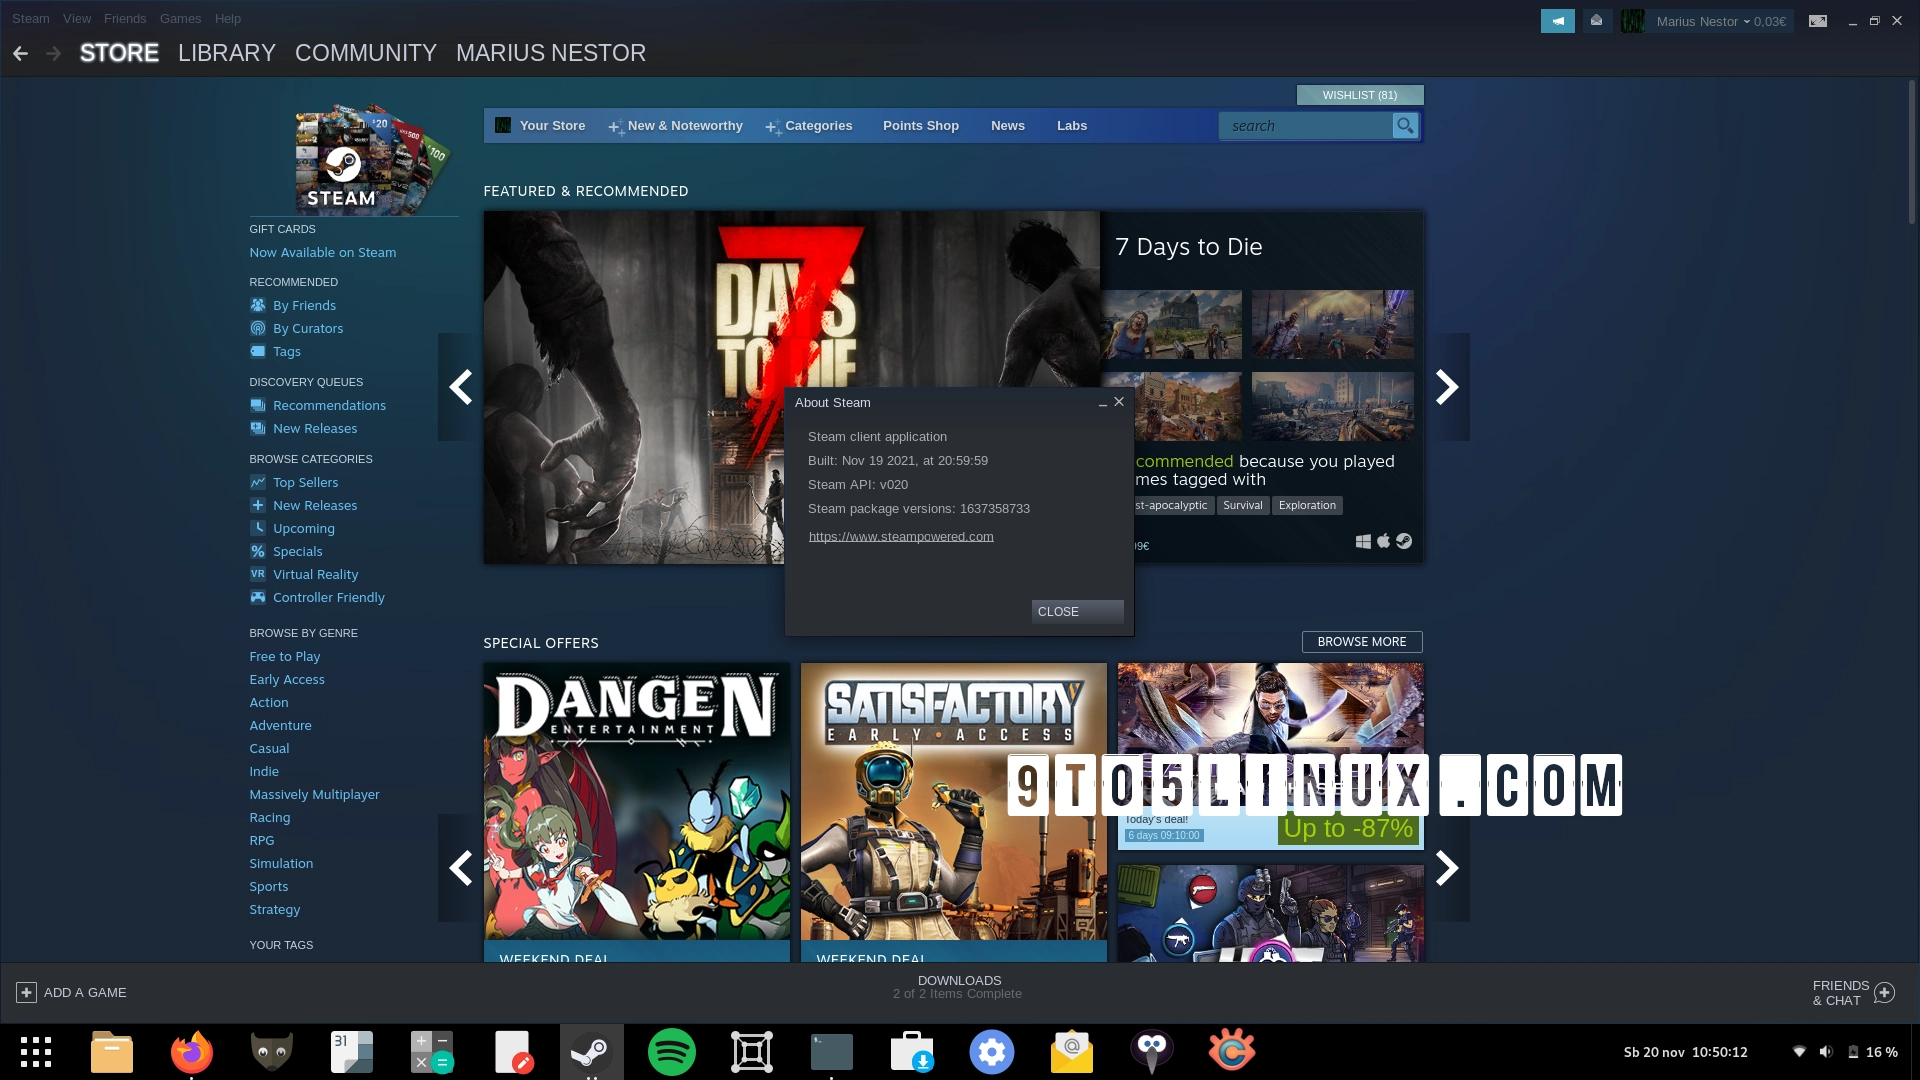 Steam Client Now Supports VA-API Hardware Encoding on Linux, CEG DRM Games